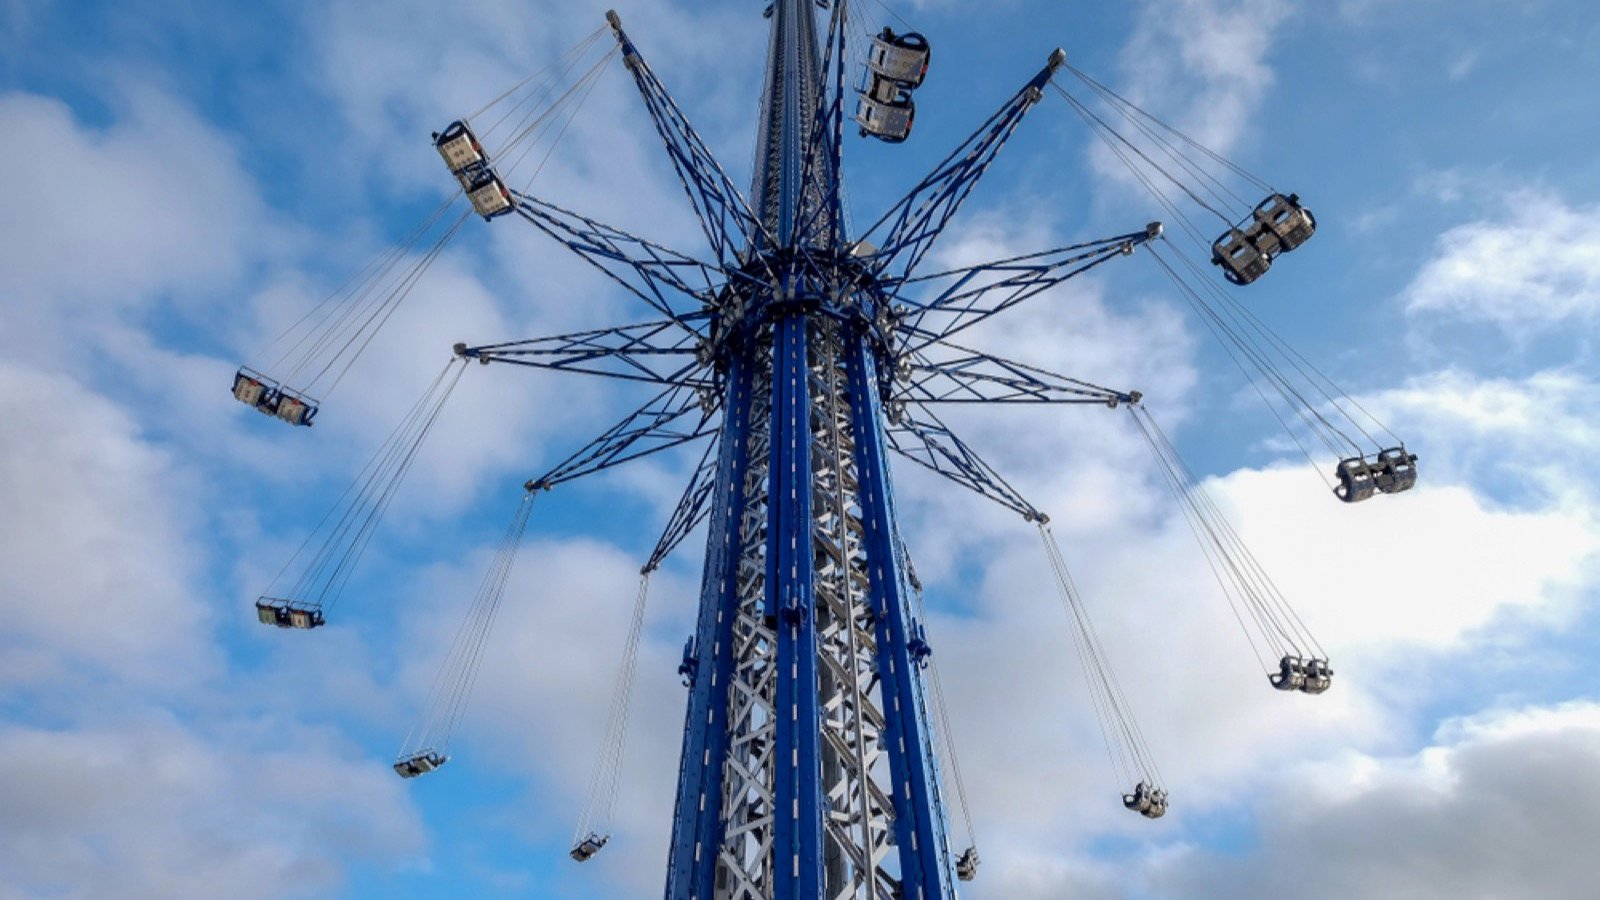 <p>If you’re a thrill seeker, you will want to ride the StarFlyer at ICON Park. For about $12, adrenaline seekers can strap in and reach speeds up to 60 miles per hour as they soar 450 feet in the Florida sky. After the ride, you can tell your friends you were brave enough to ride the tallest swing ride in the world.</p>